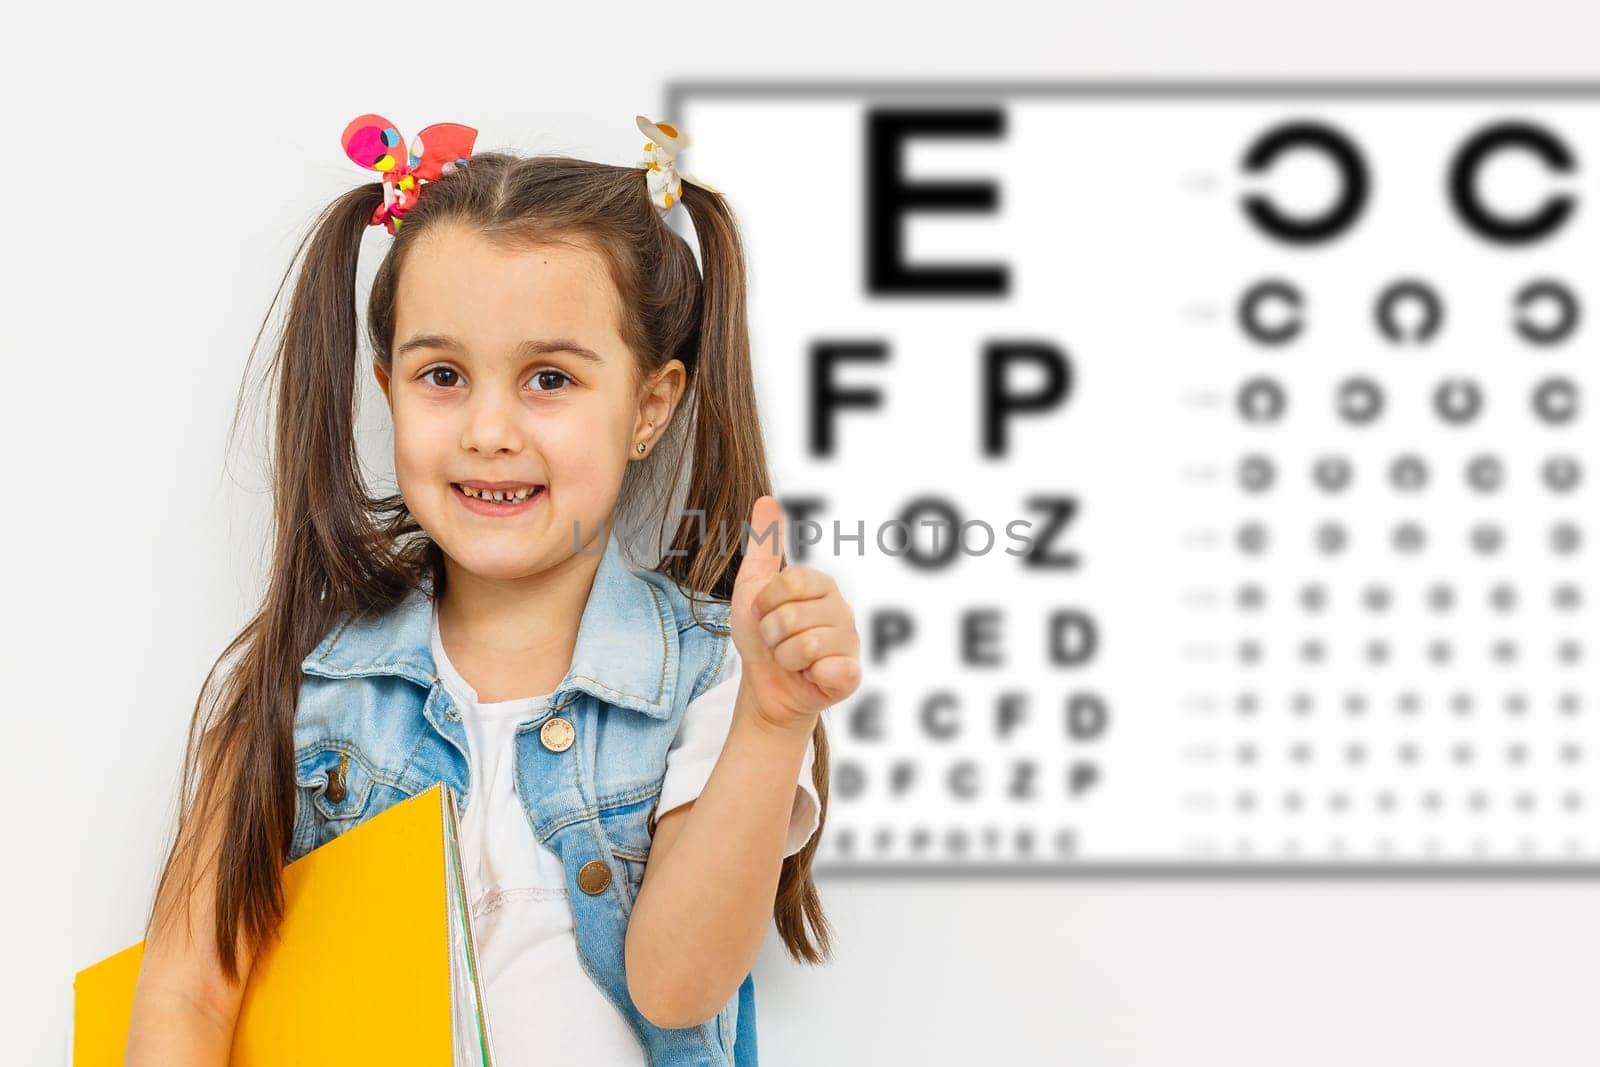 concept vision testing. child girl with eyeglasses at the doctor ophthalmologist